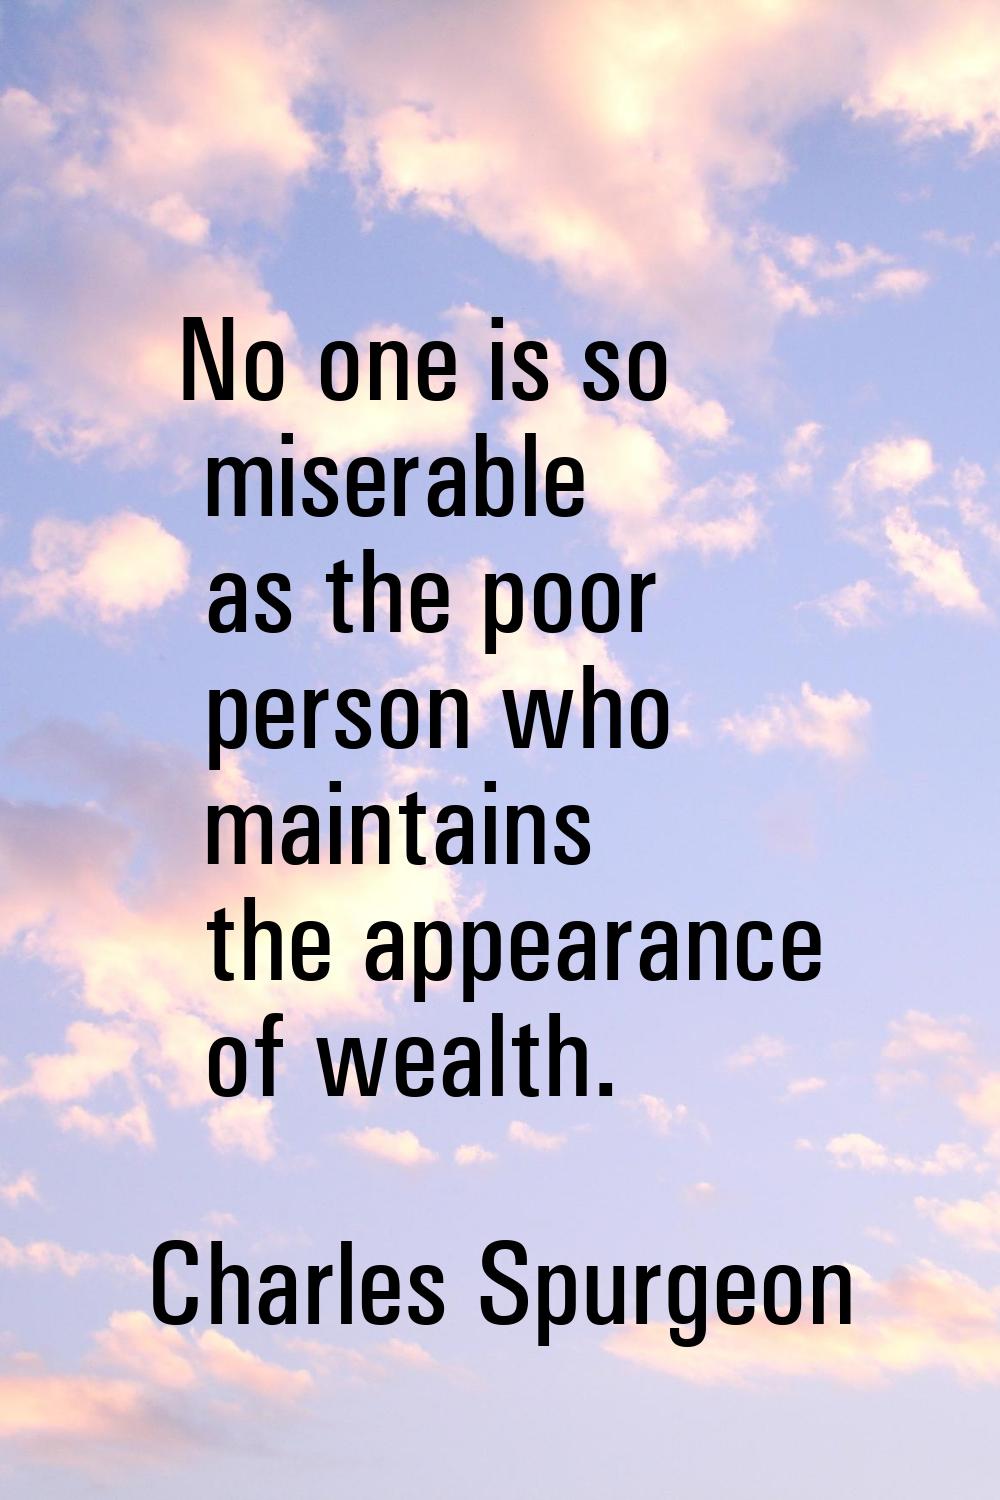 No one is so miserable as the poor person who maintains the appearance of wealth.